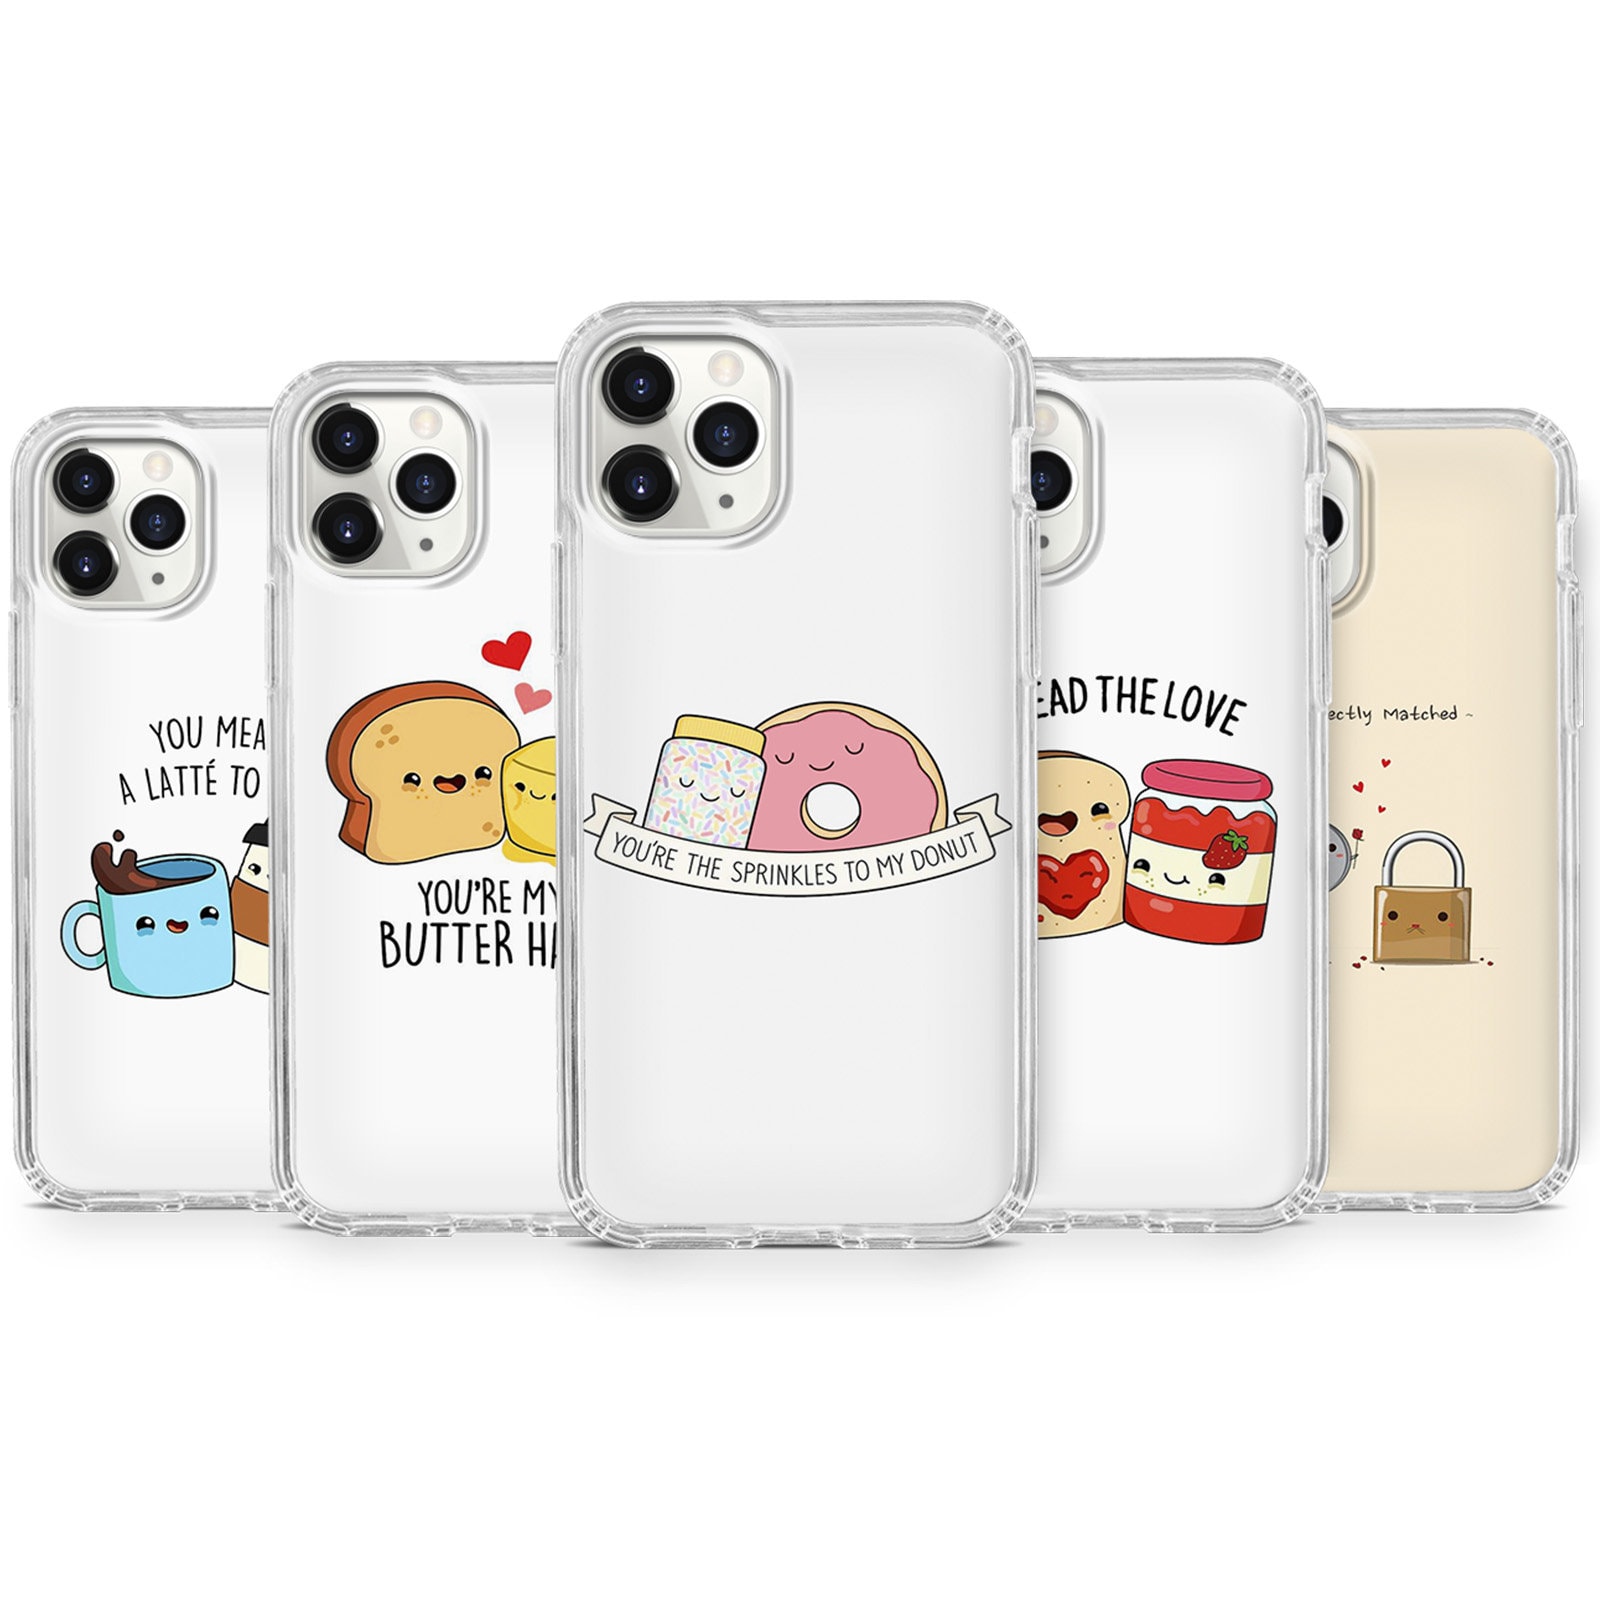 12 pro 11 7,8+ XS,XR,SE 2020,11 & Samsung S10,A40,A50,51 Valentine Couple Paired Cute Phone Cases For iPhone 12 Huawei P20,P30 a122 X